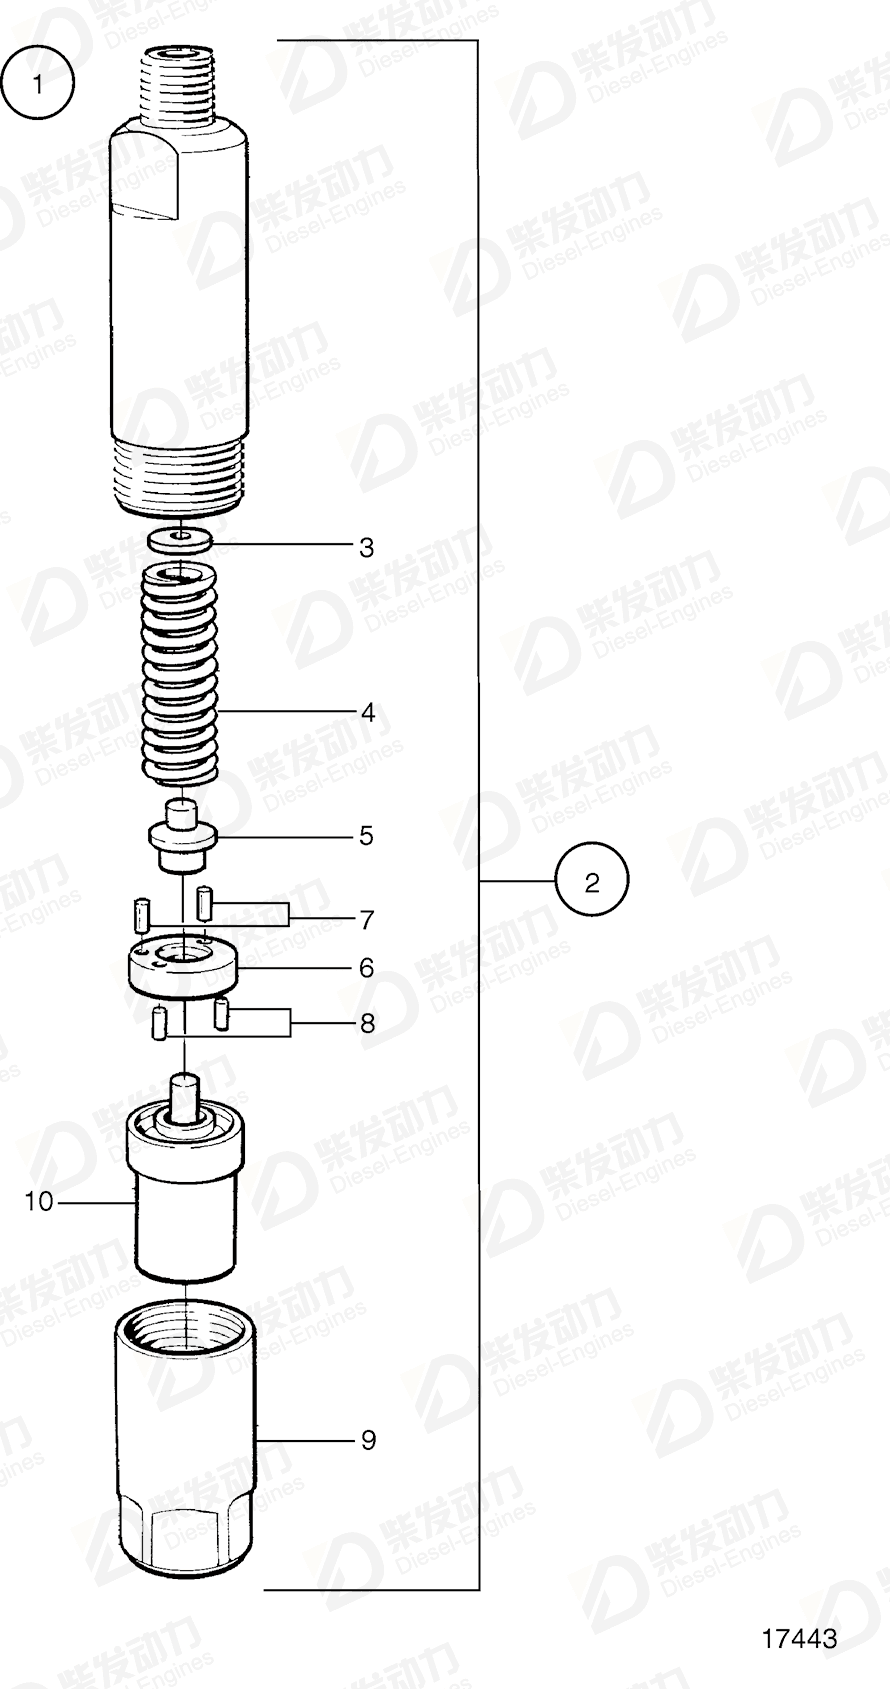 VOLVO Injector 1556446 Drawing